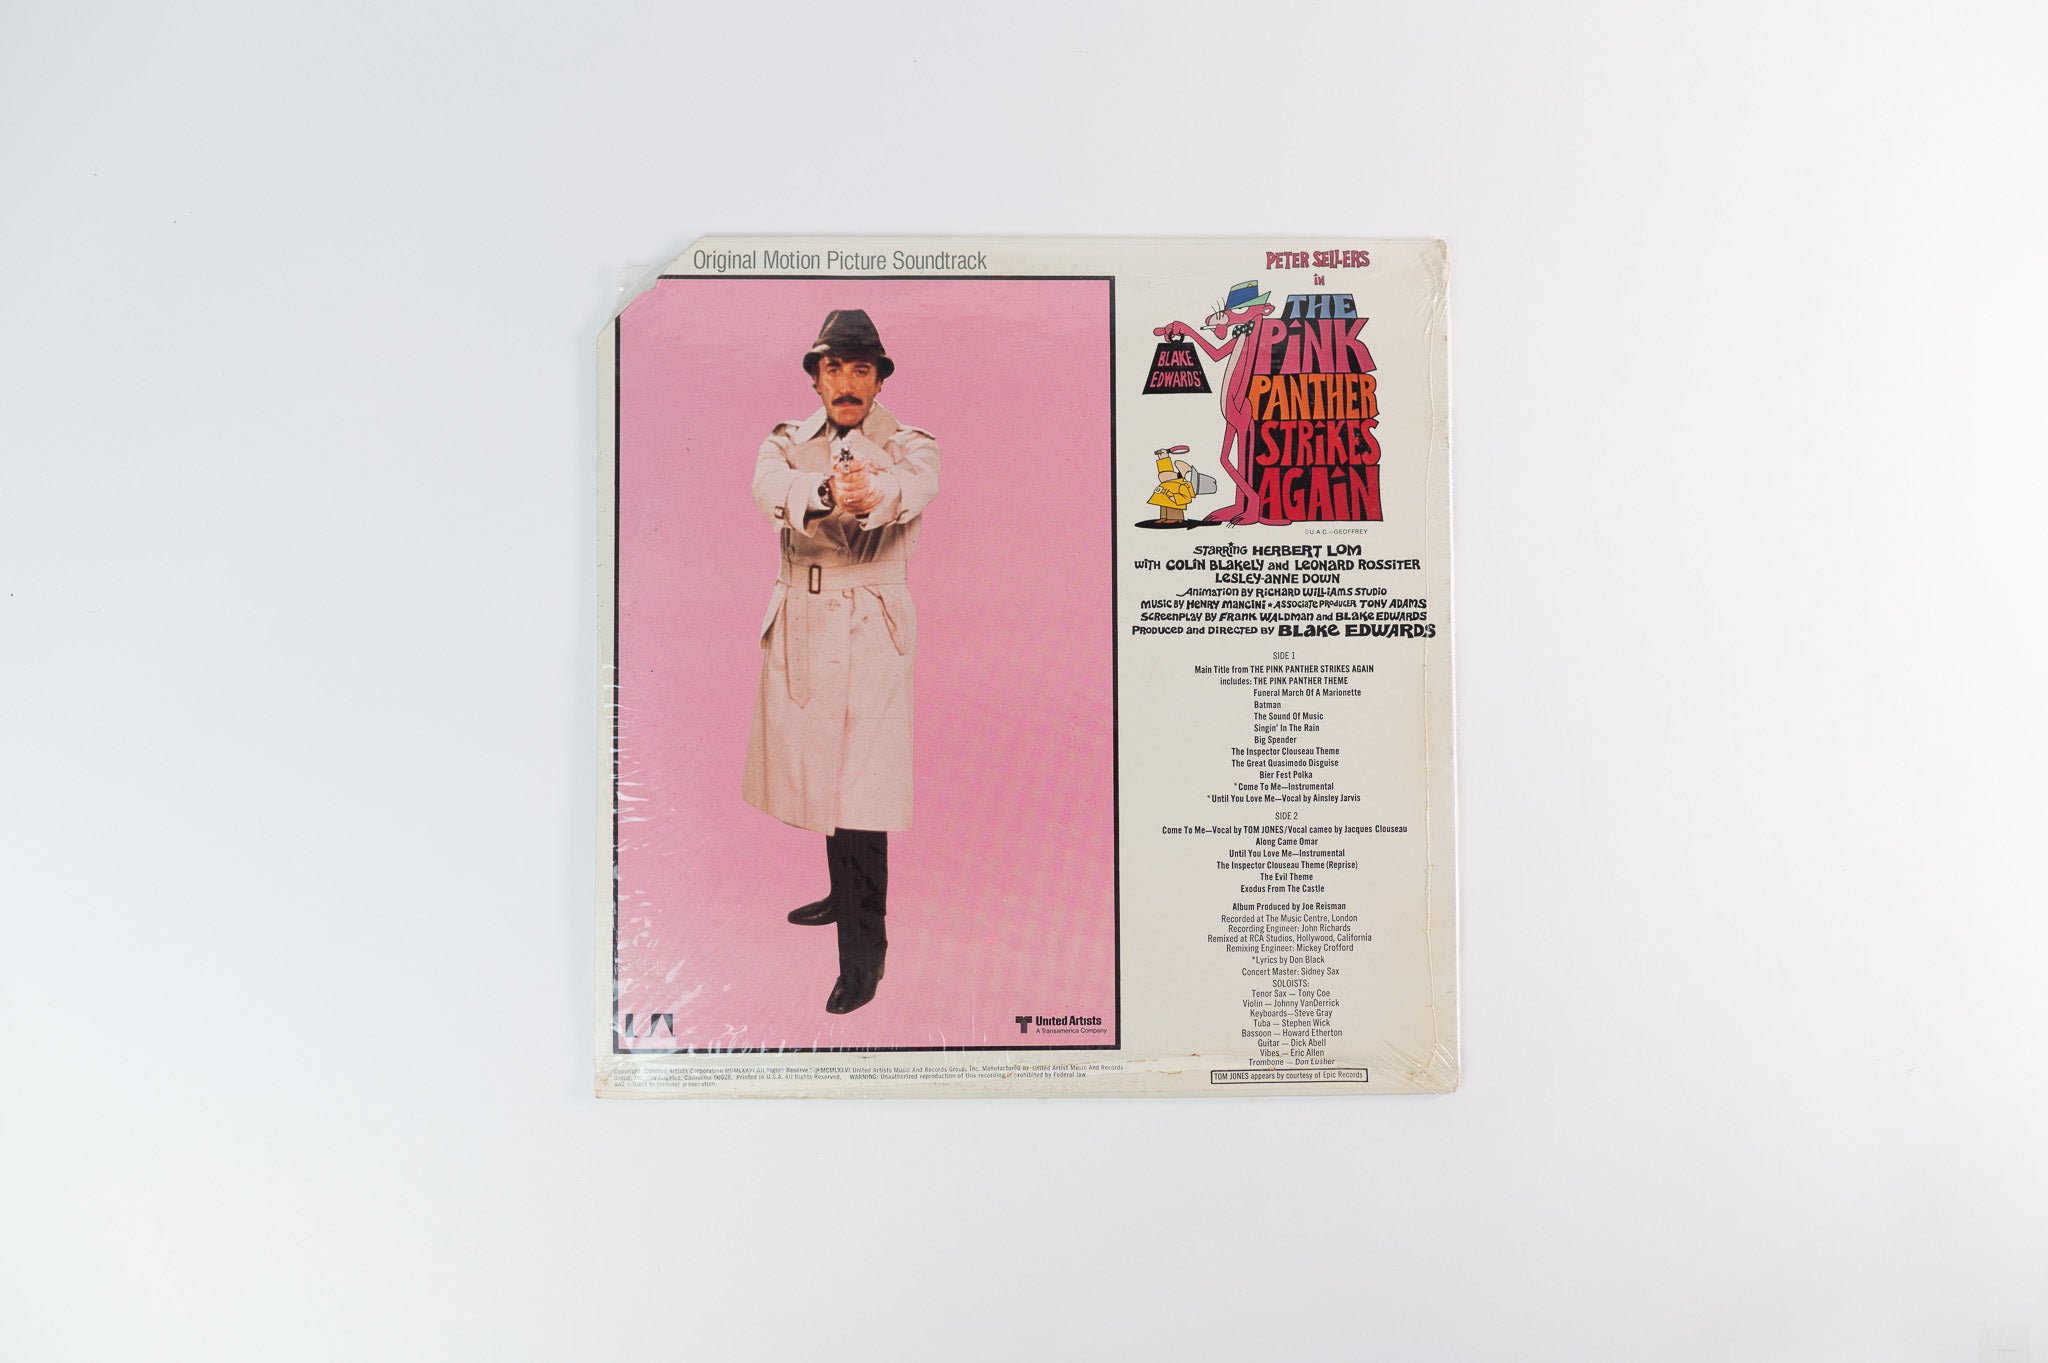 Henry Mancini - The Pink Panther Strikes Again (Original Soundtrack) on United Artists Sealed